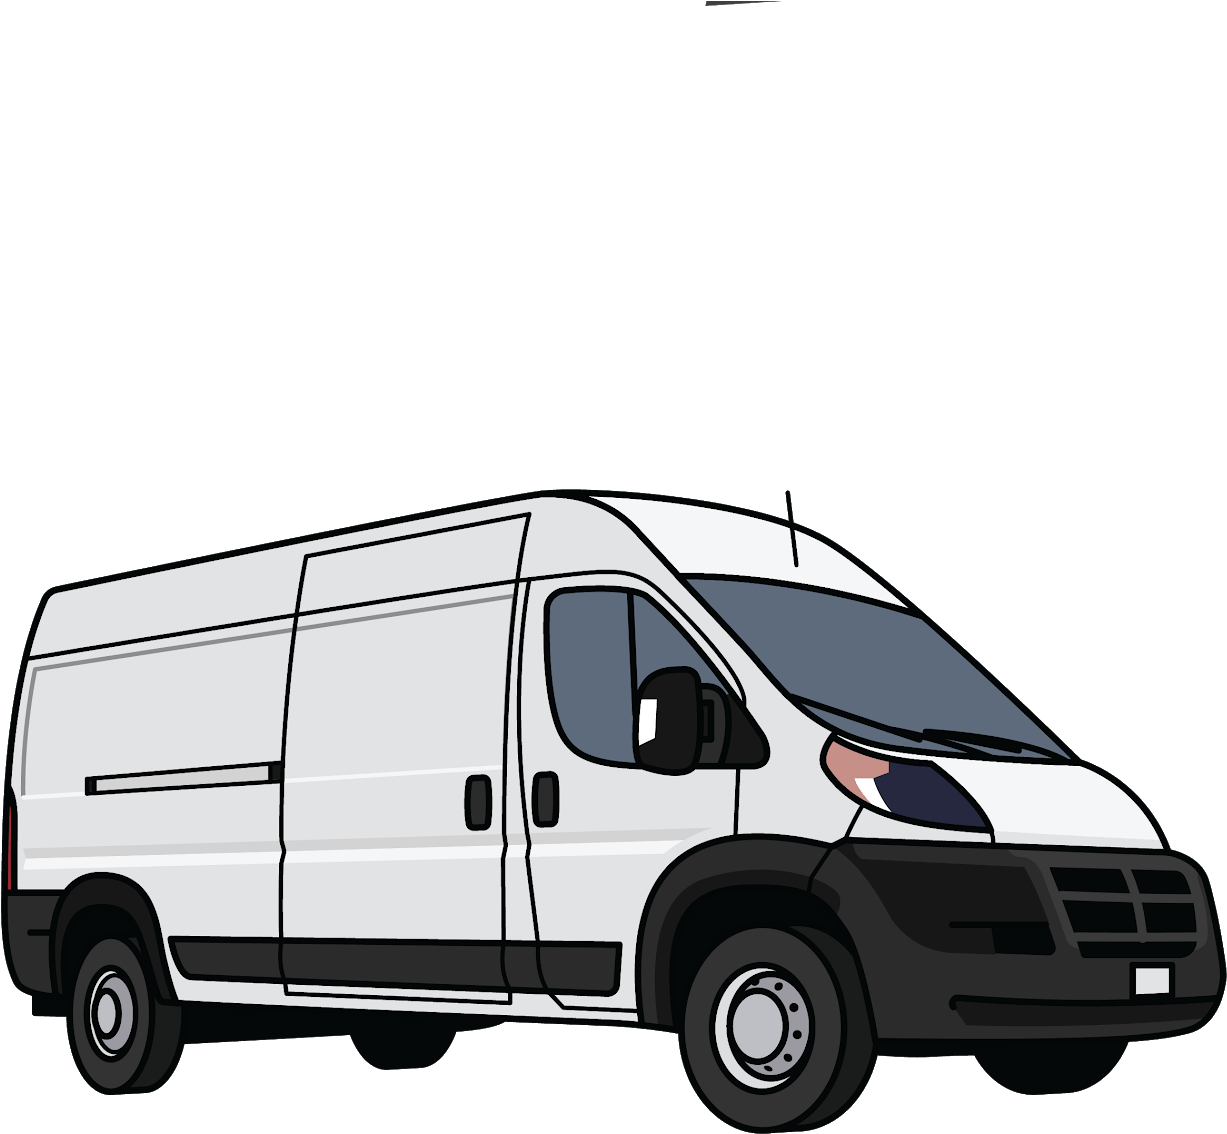 Download The Last Euro- Style Van That I'll Talk About, And - Compact Van  PNG Image with No Background 